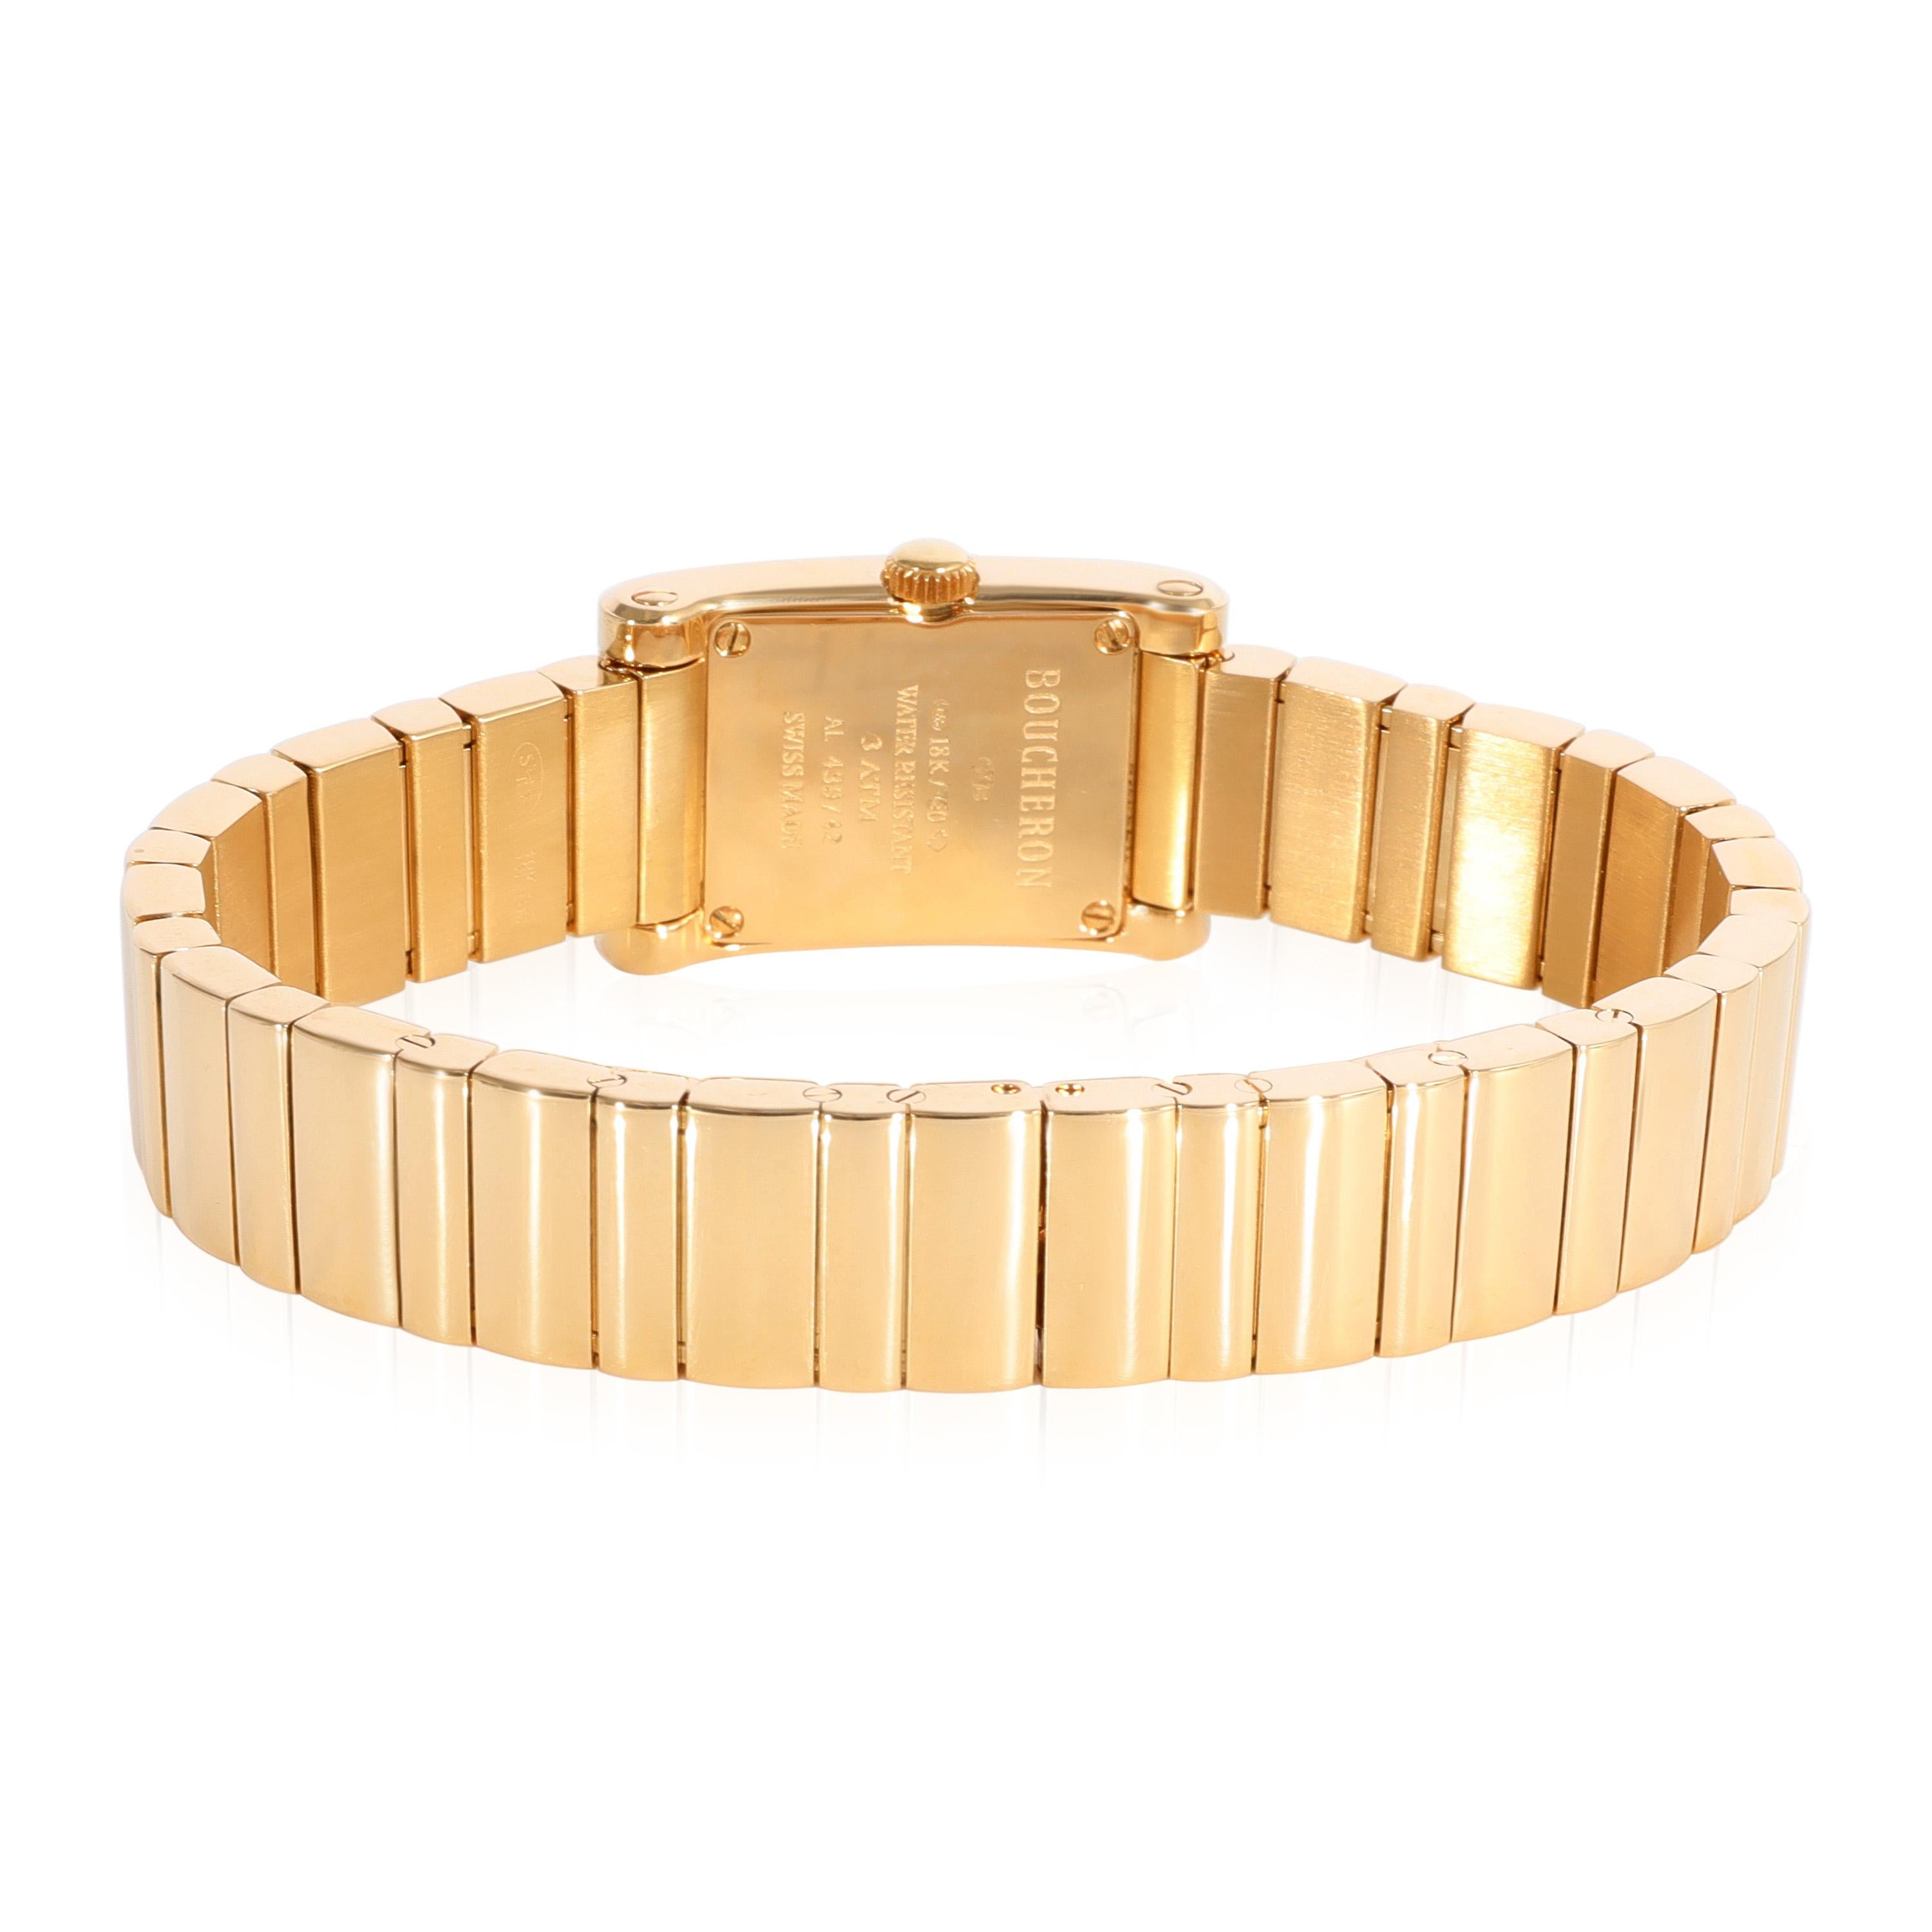 Boucheron Reflet 347 Women's Watch in  Yellow Gold

SKU: 121804

PRIMARY DETAILS
Brand: Boucheron
Model: Reflet
Country of Origin: Switzerland
Movement Type: Quartz: Battery
Year of Manufacture: 2000-2009
Condition: In excellent condition and